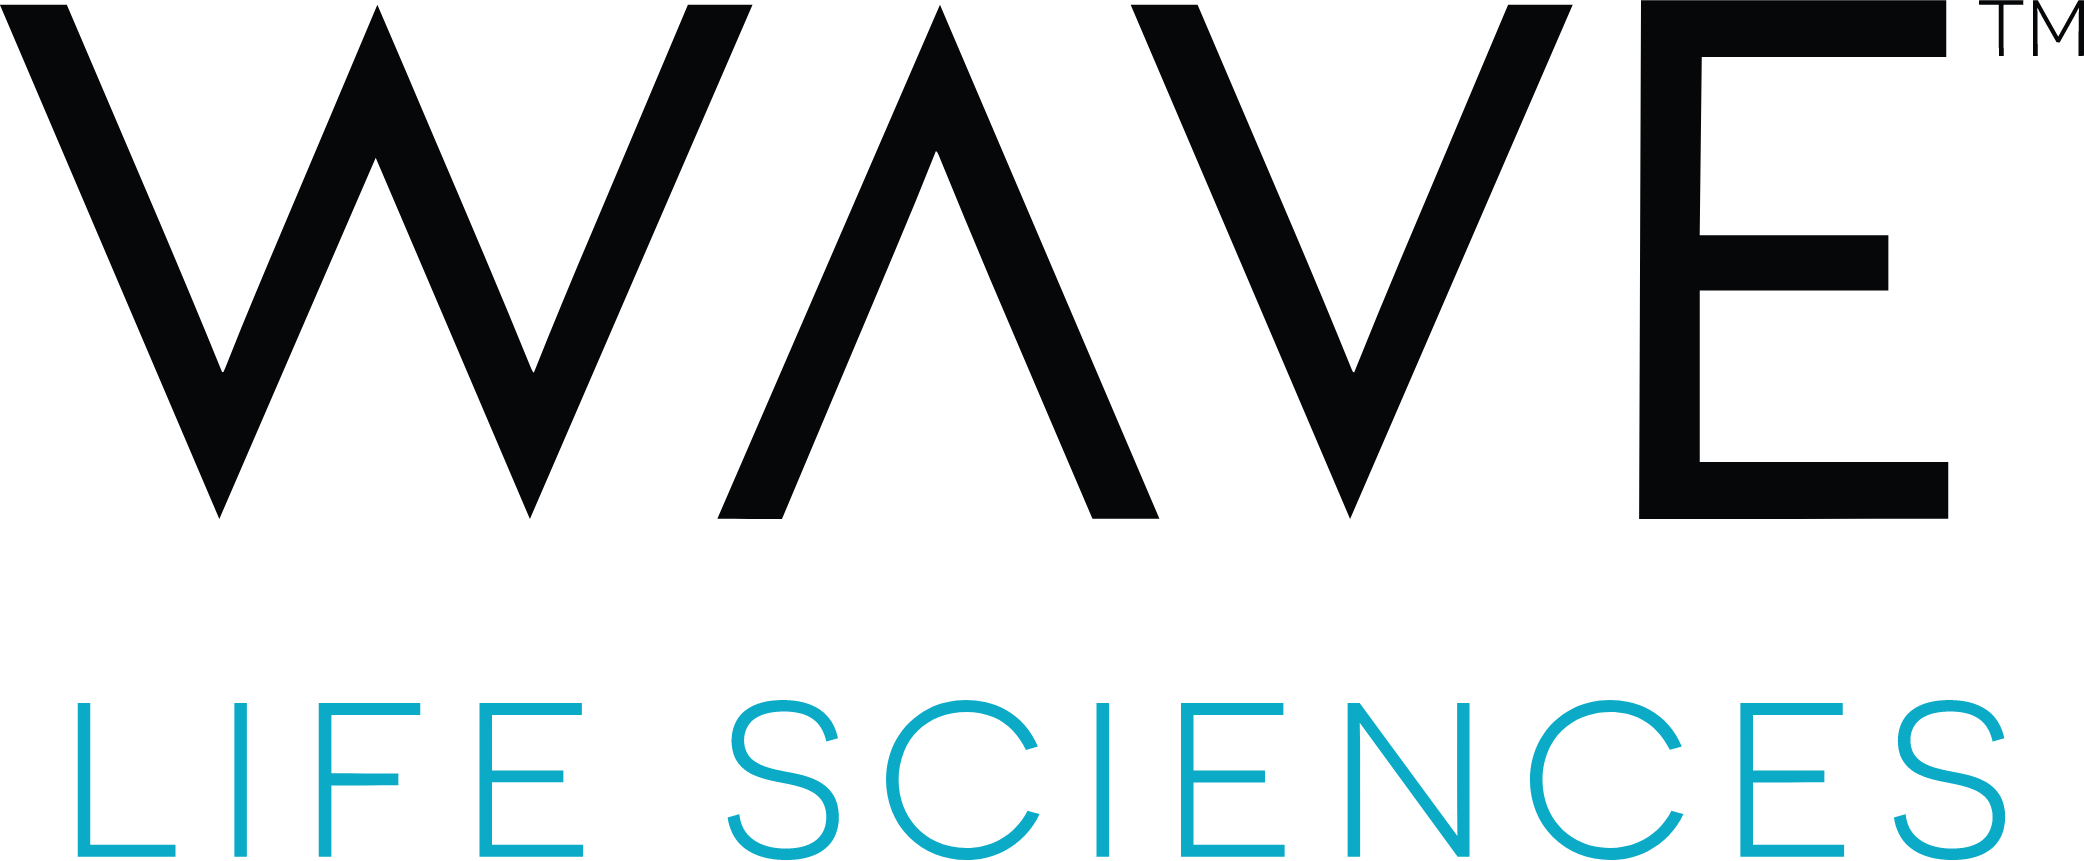 Mirae Asset Capital Life Science Emerges from Stealth with $50M Fund |  Business Wire